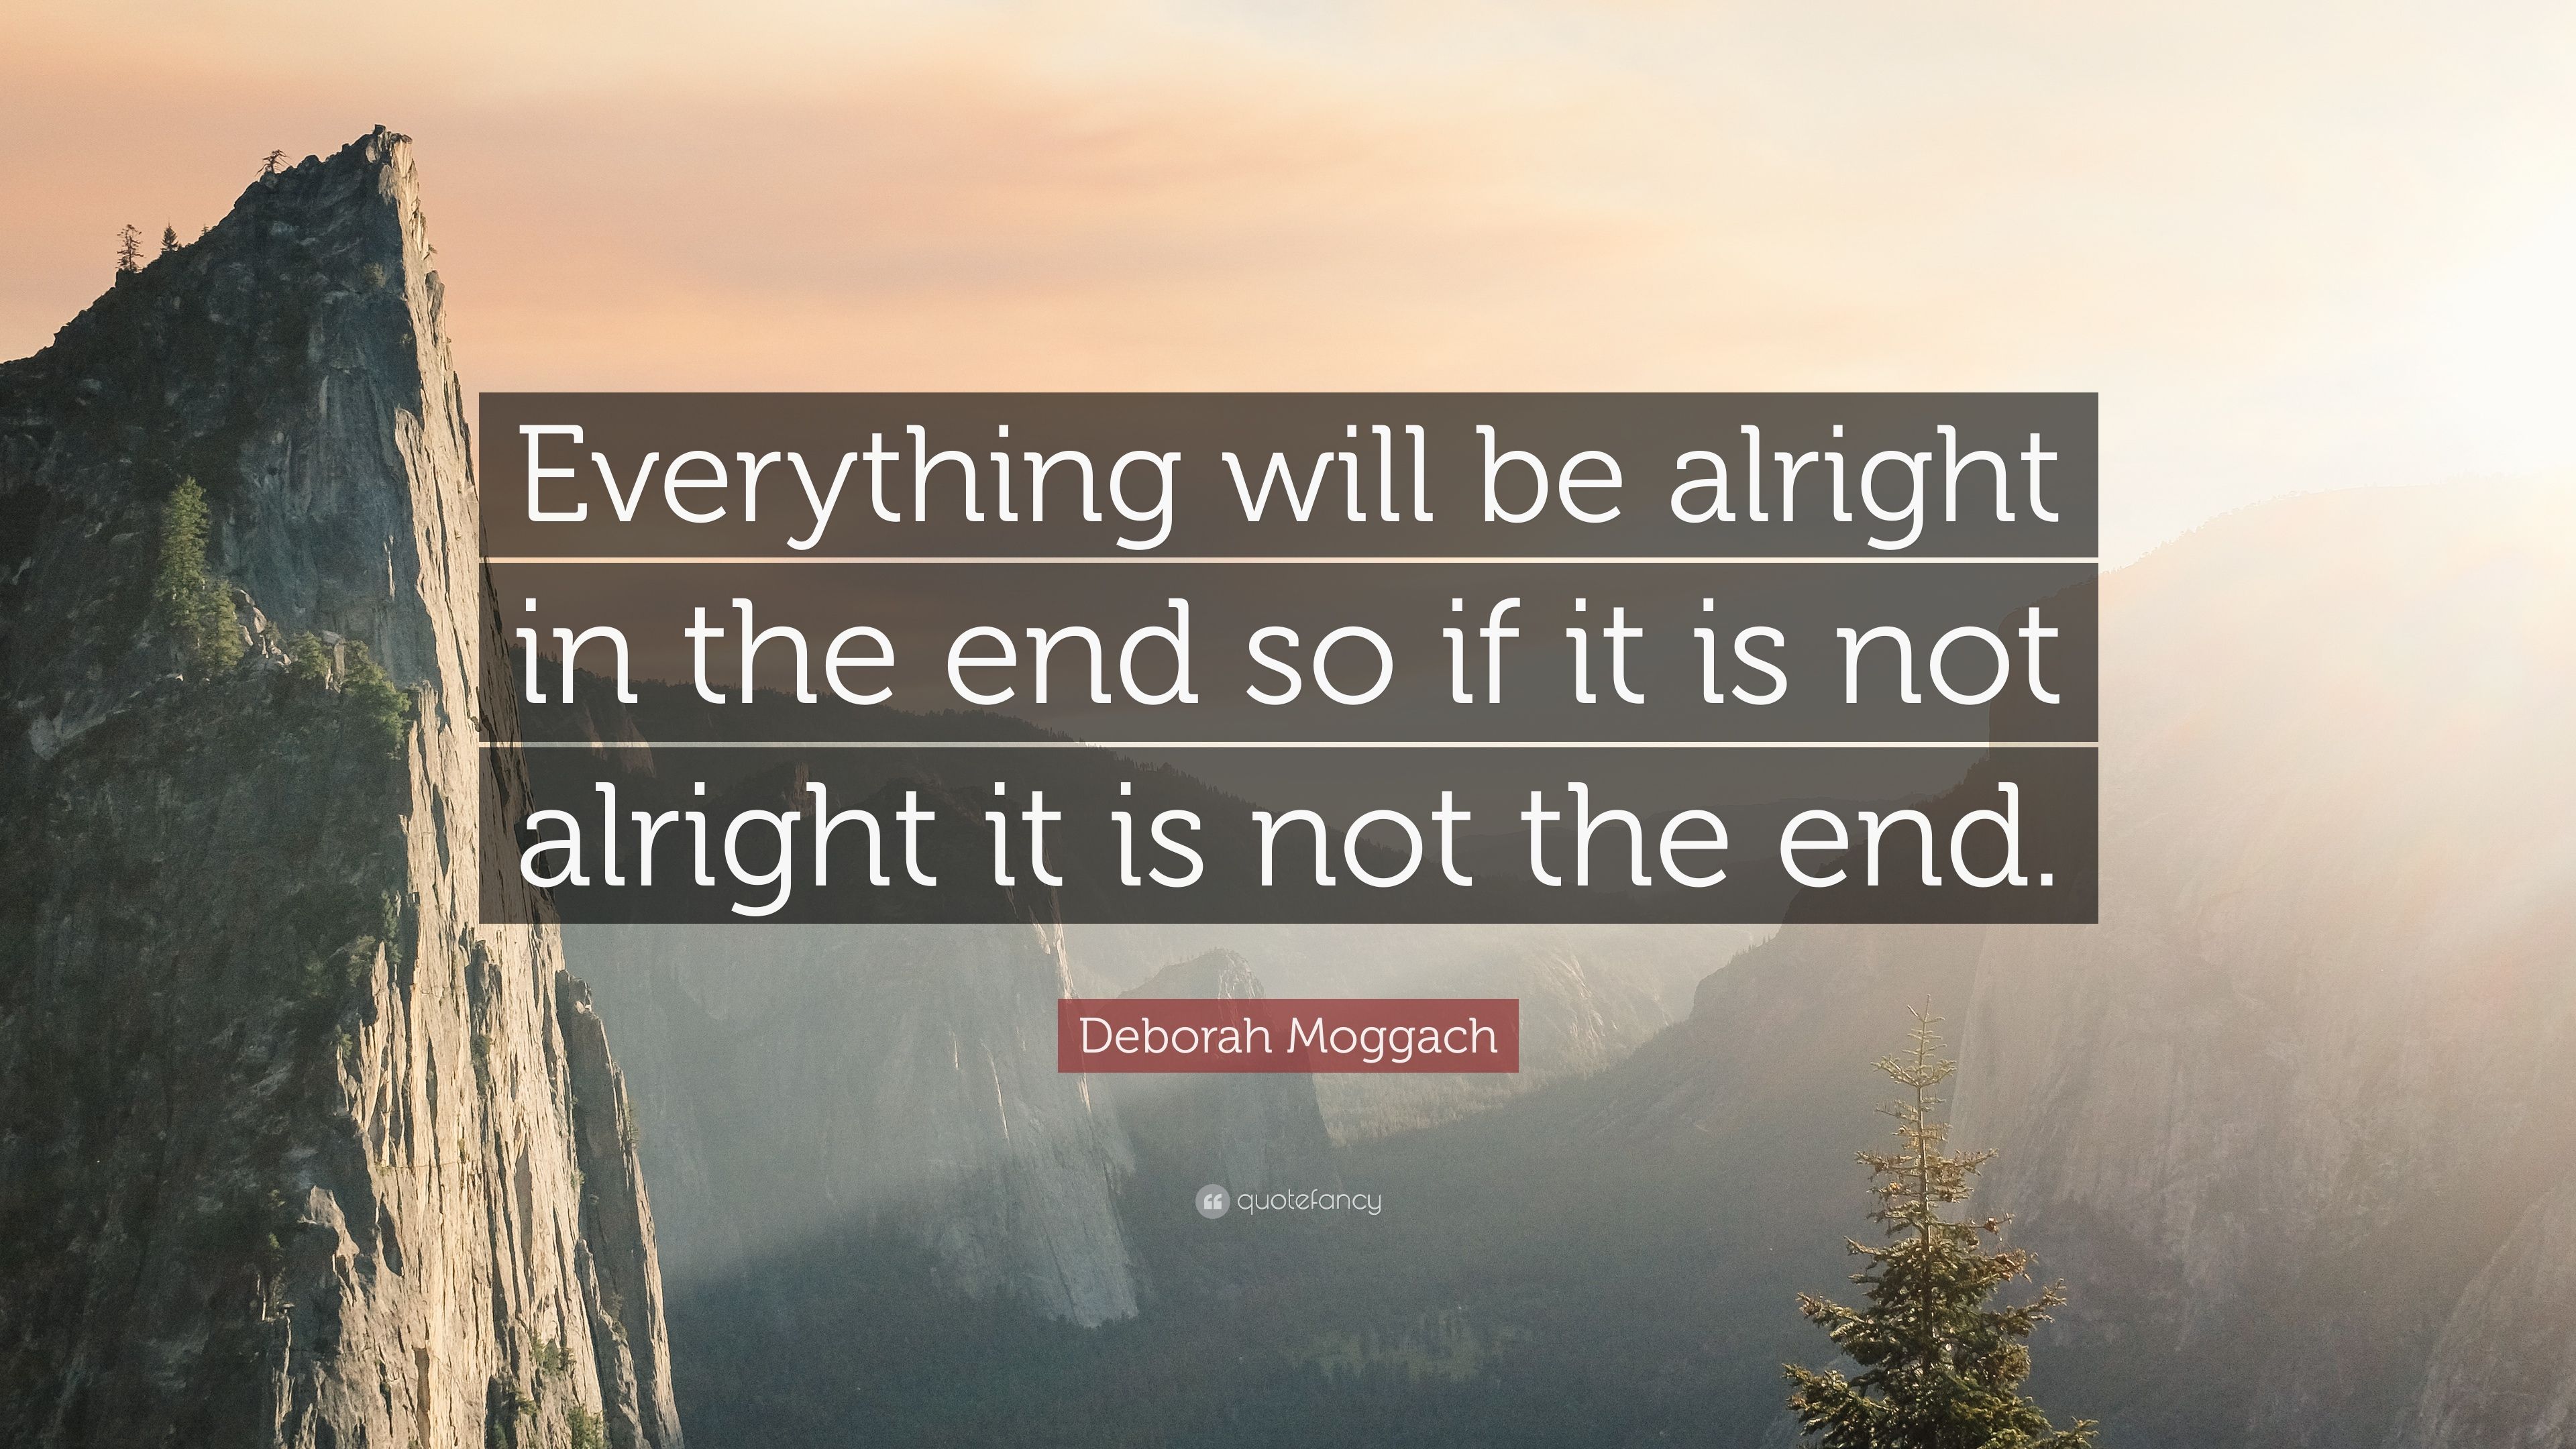 Deborah Moggach Quote: "Everything will be alright in the end so if it...